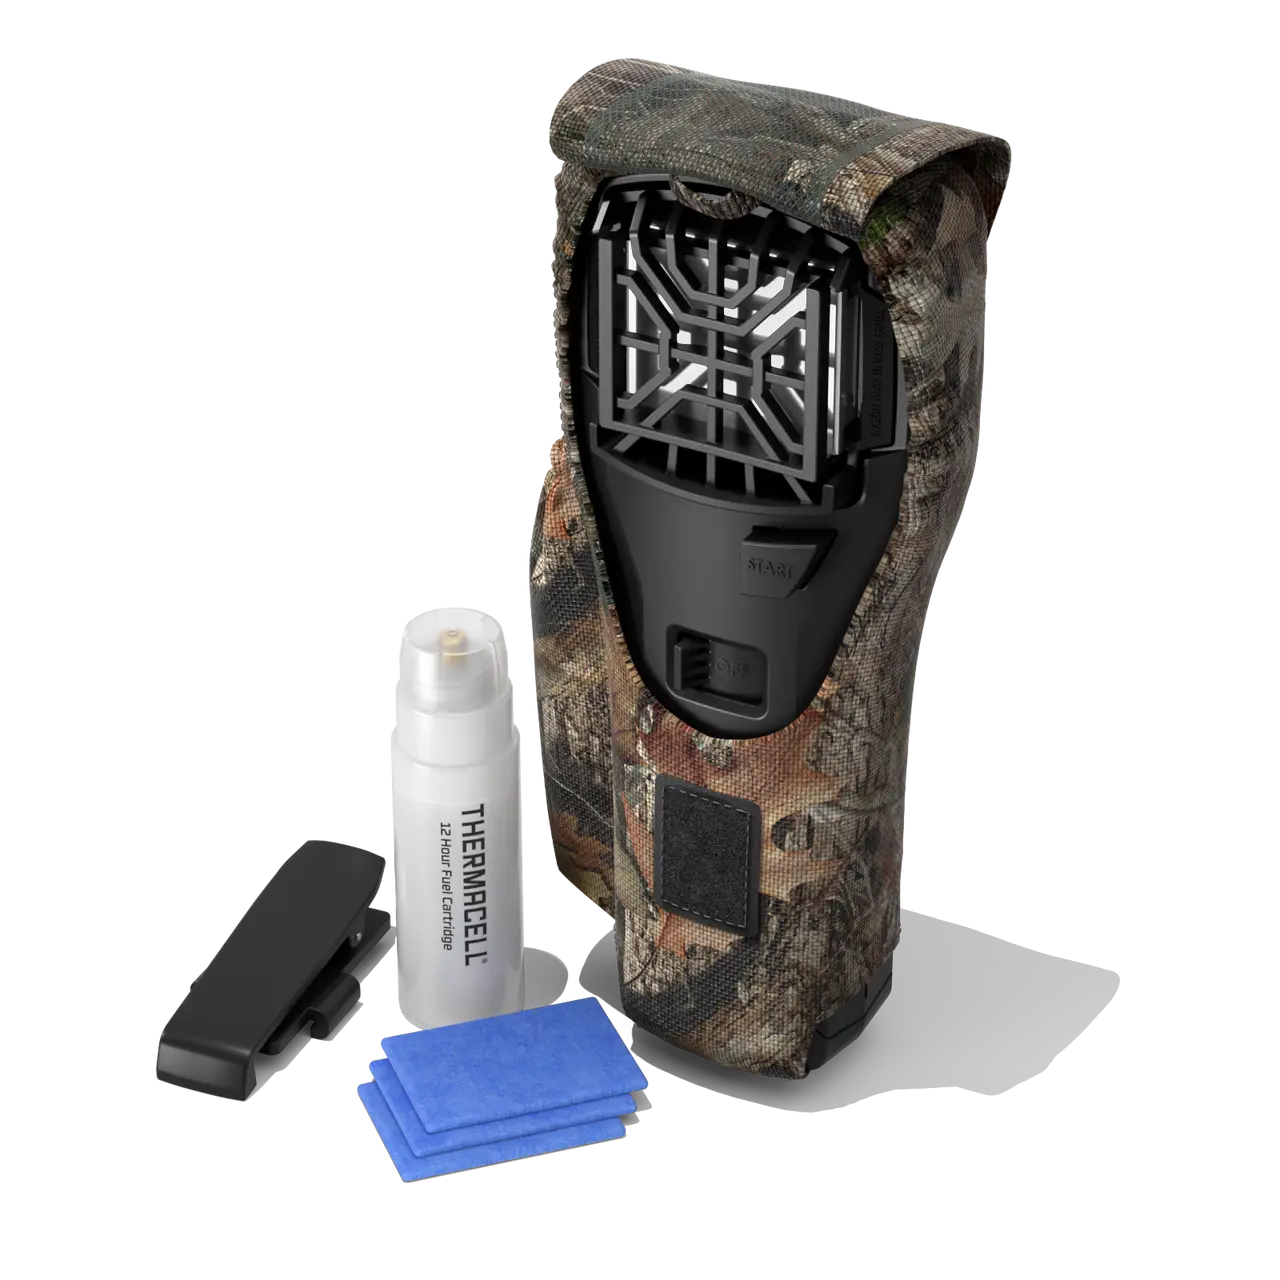 Thermacell MR300 Portable Mosquito Repeller - HUNT PACK